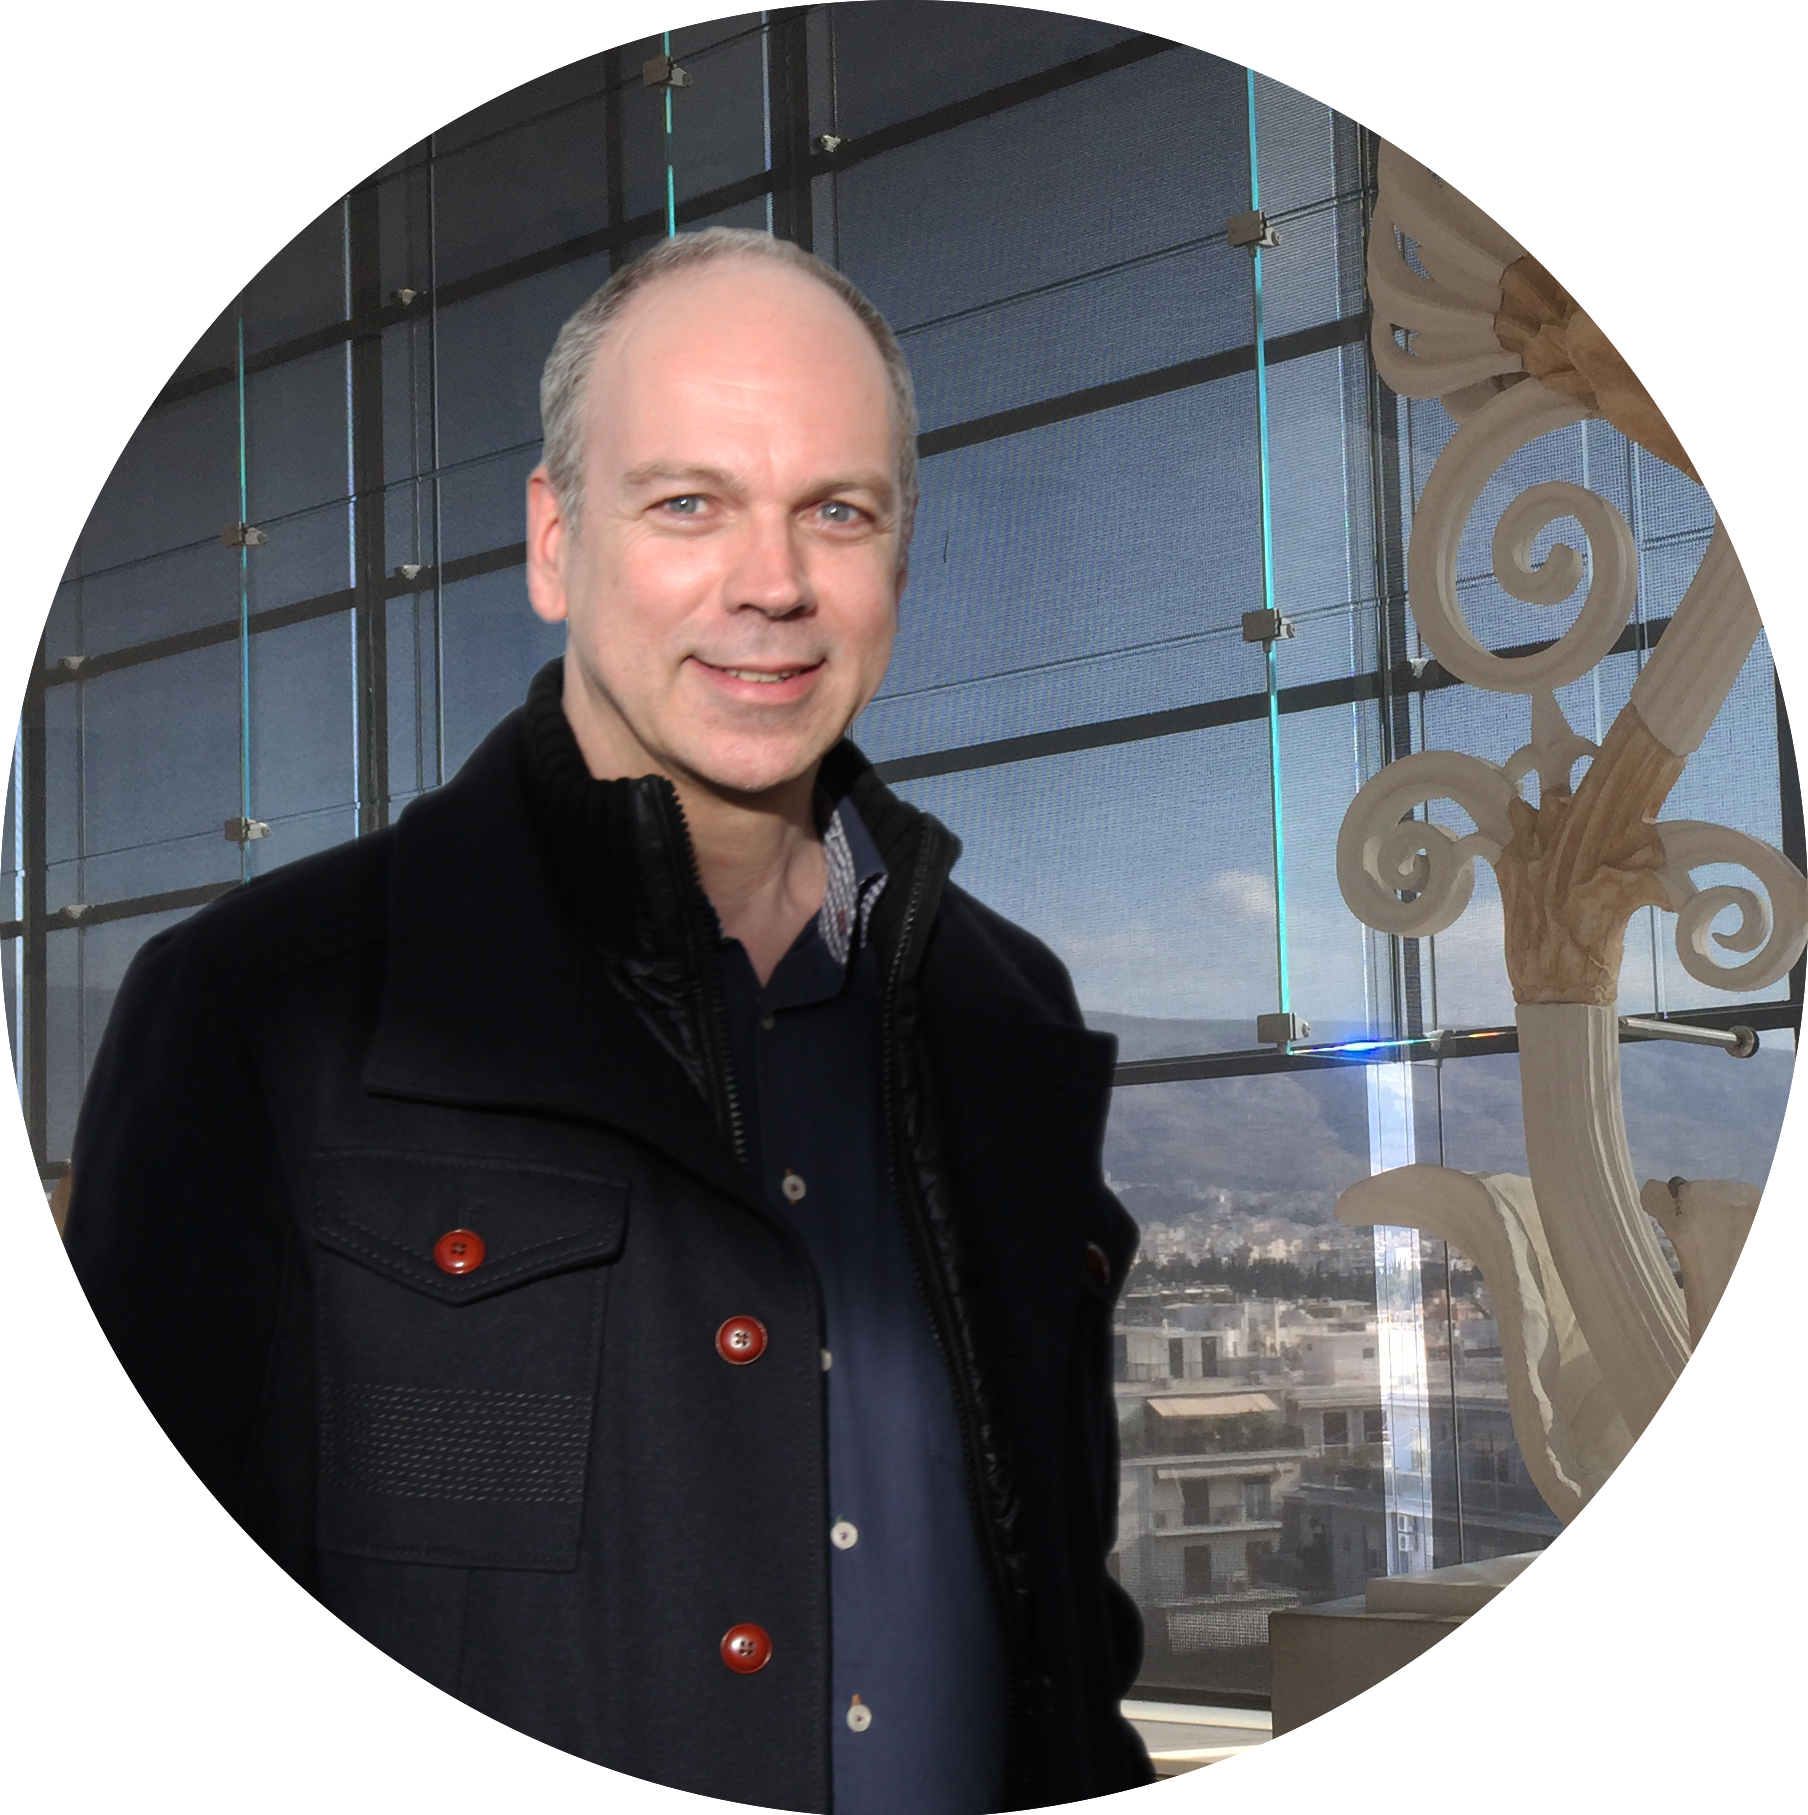 This image shows Uwe Strauch (CEO German Museums Magazin) who wears a black jacket with red buttons, a dark blue shirt and stands in front of a sculpture. He has blue eyes and very short, grey hair.